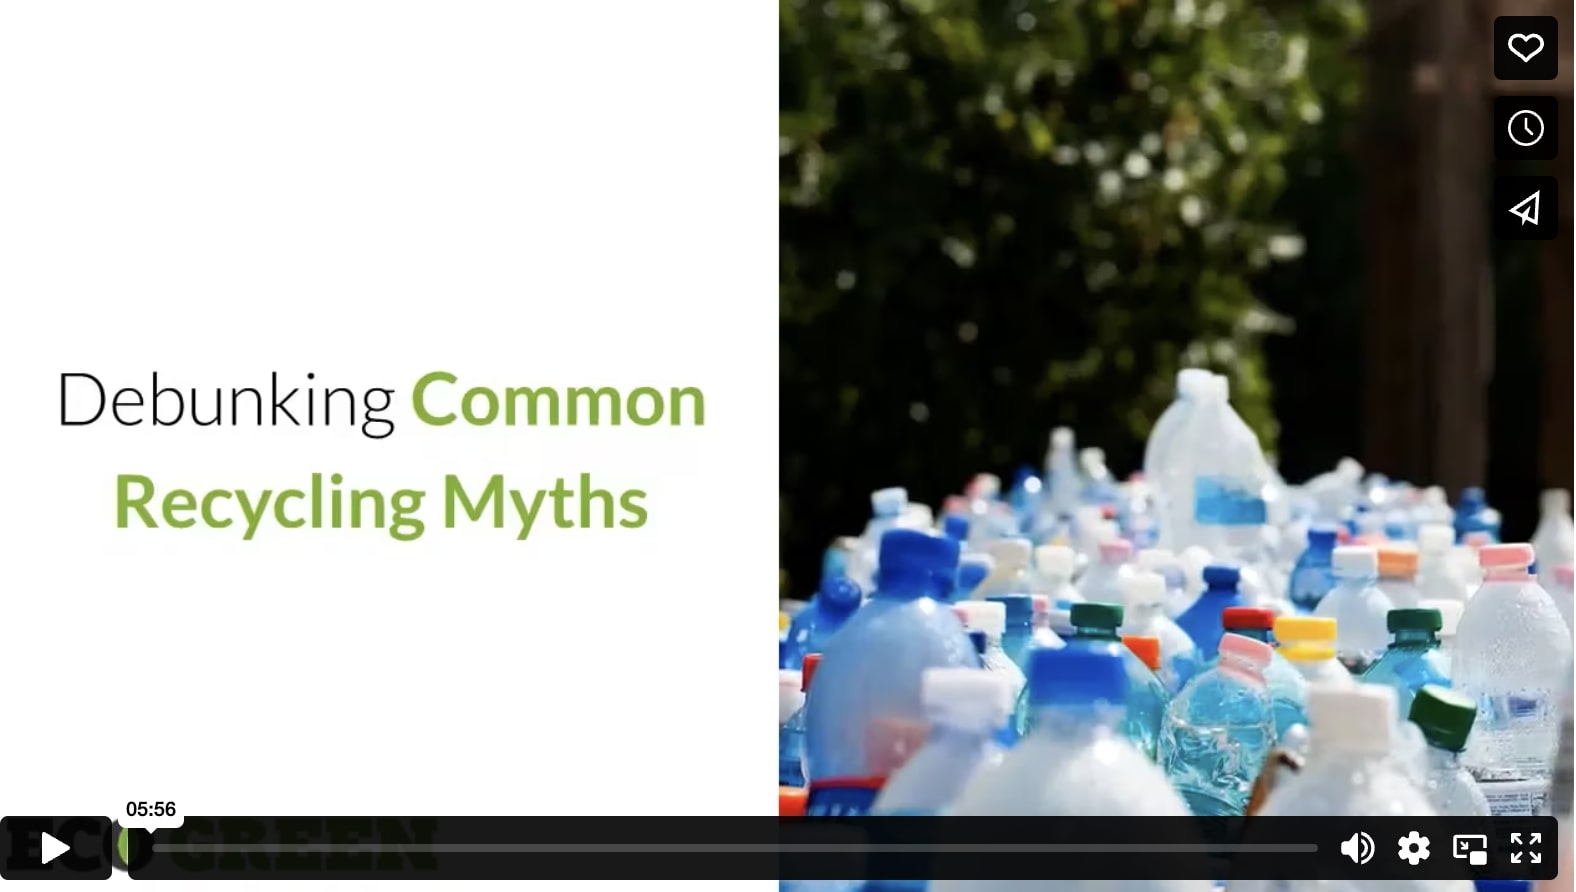 Debunking Common Recycling Myths